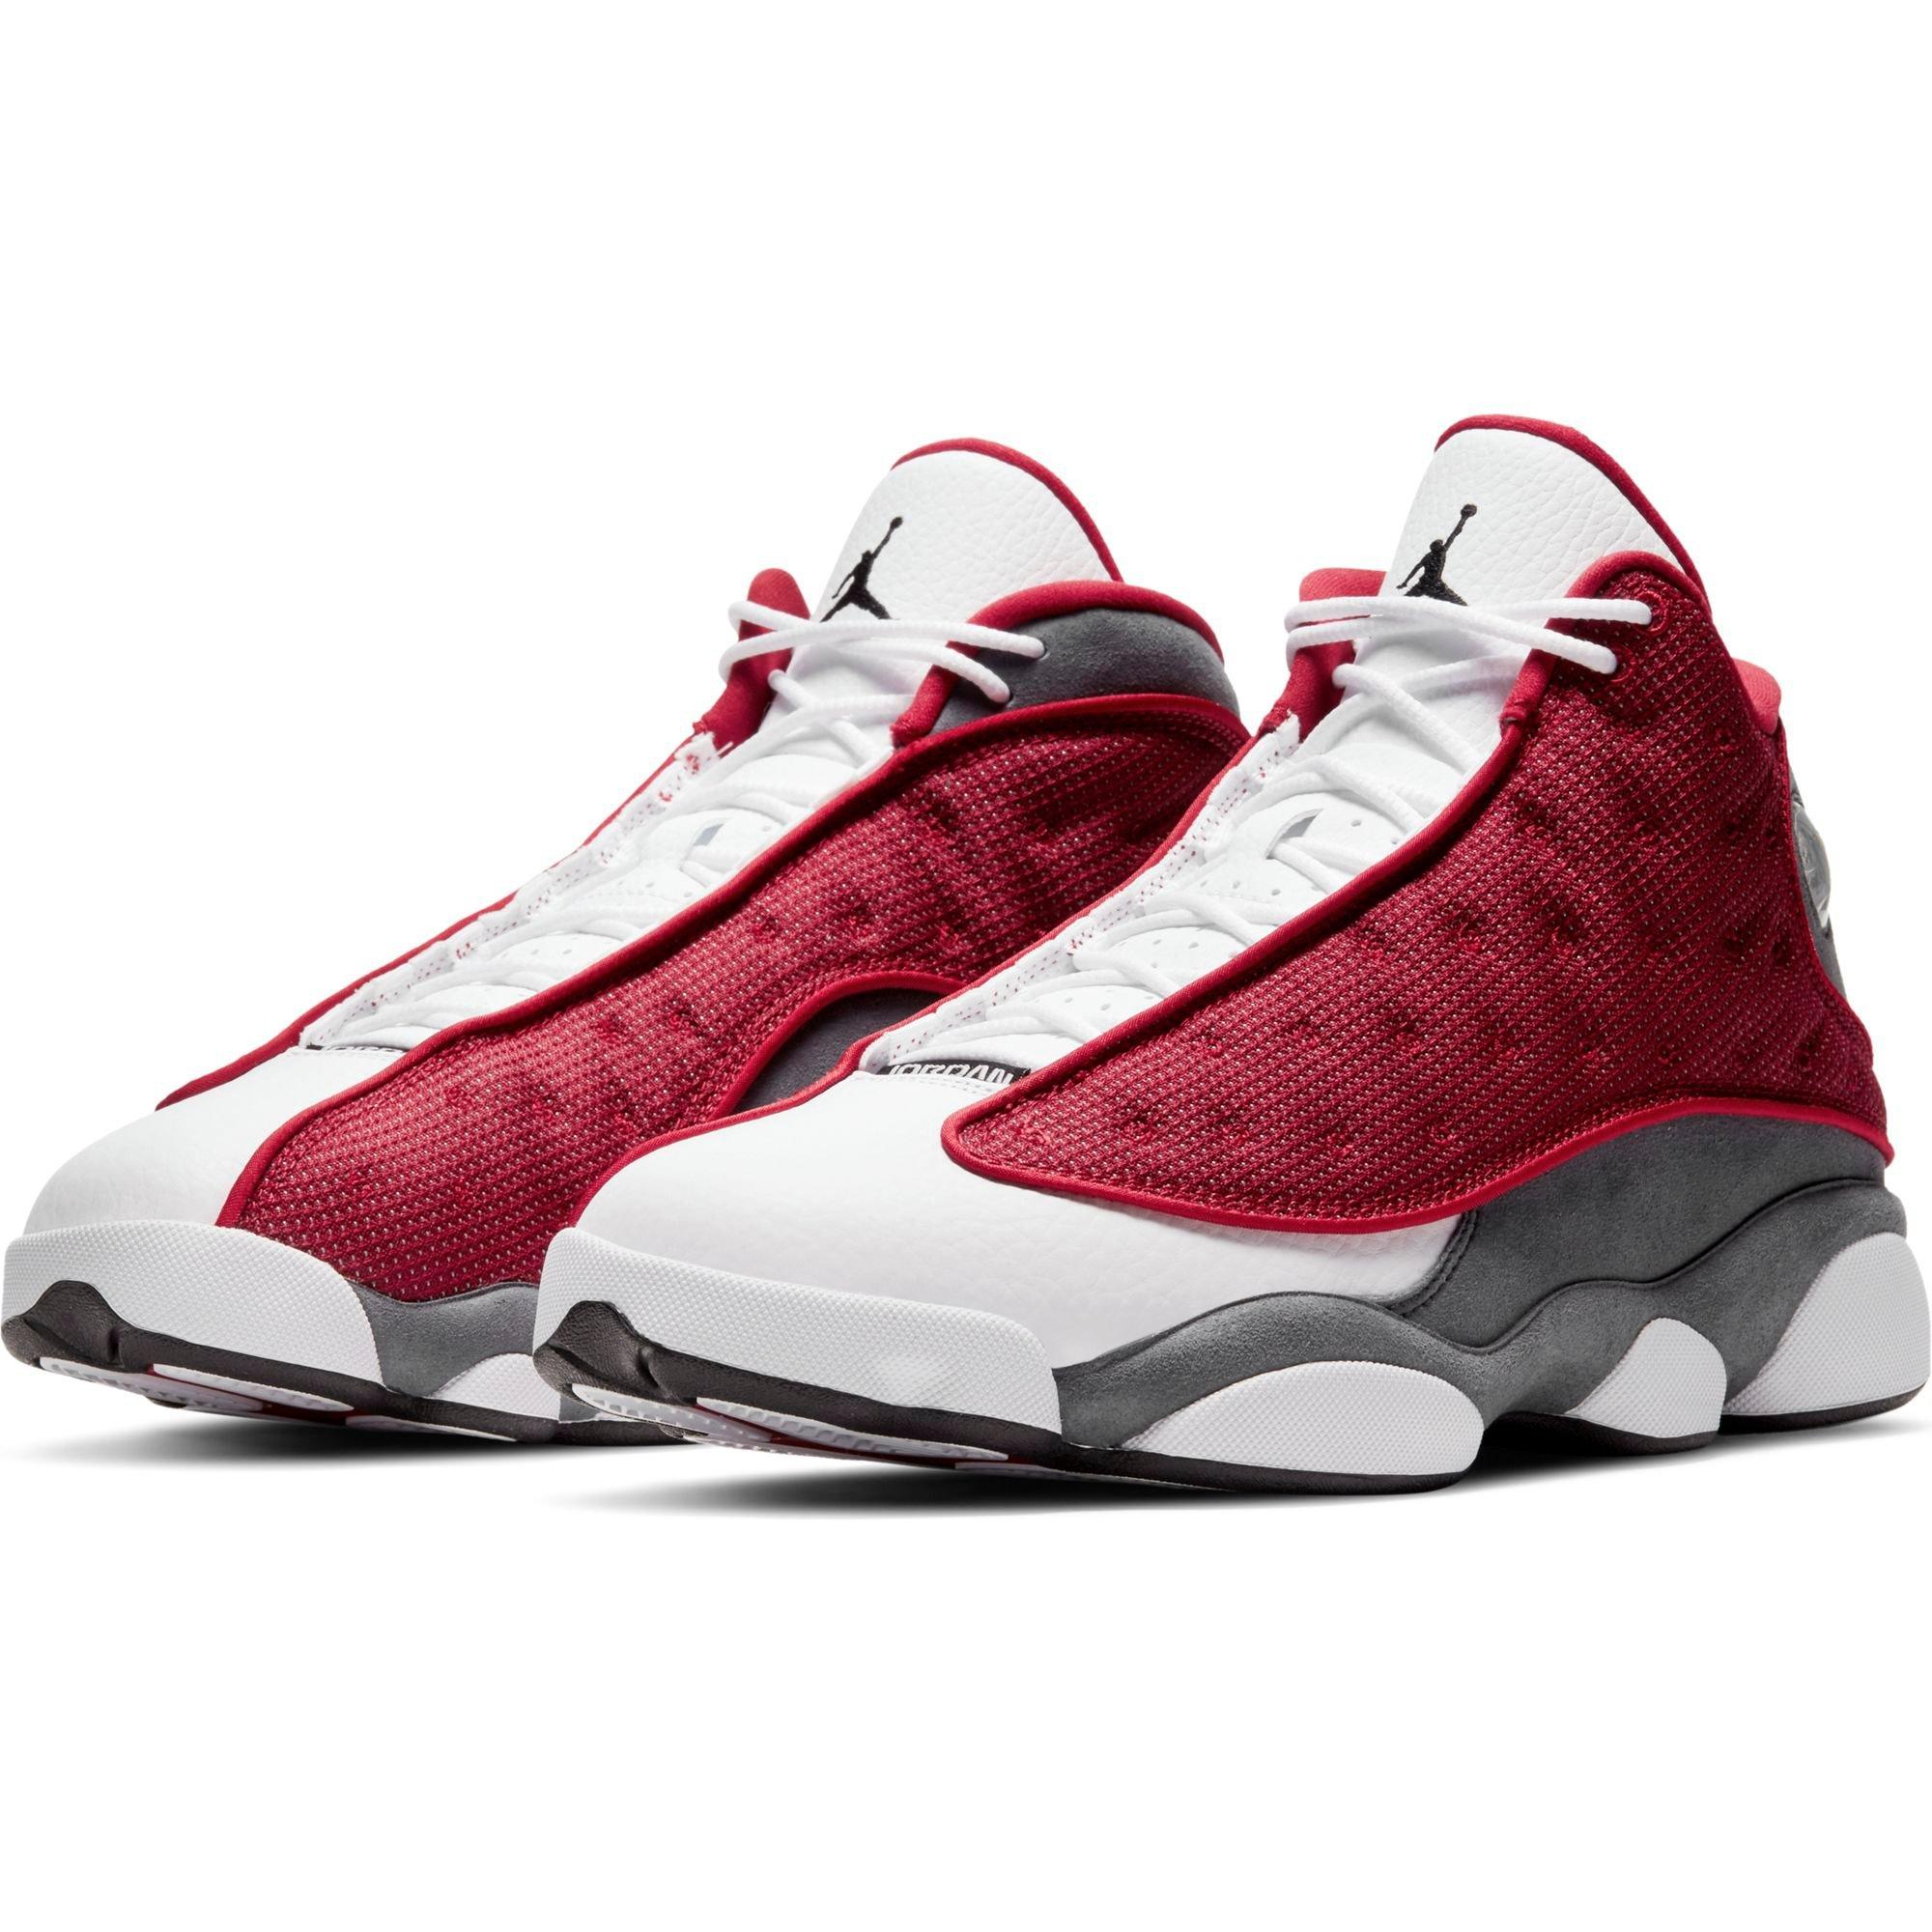 jordan 13s red and white